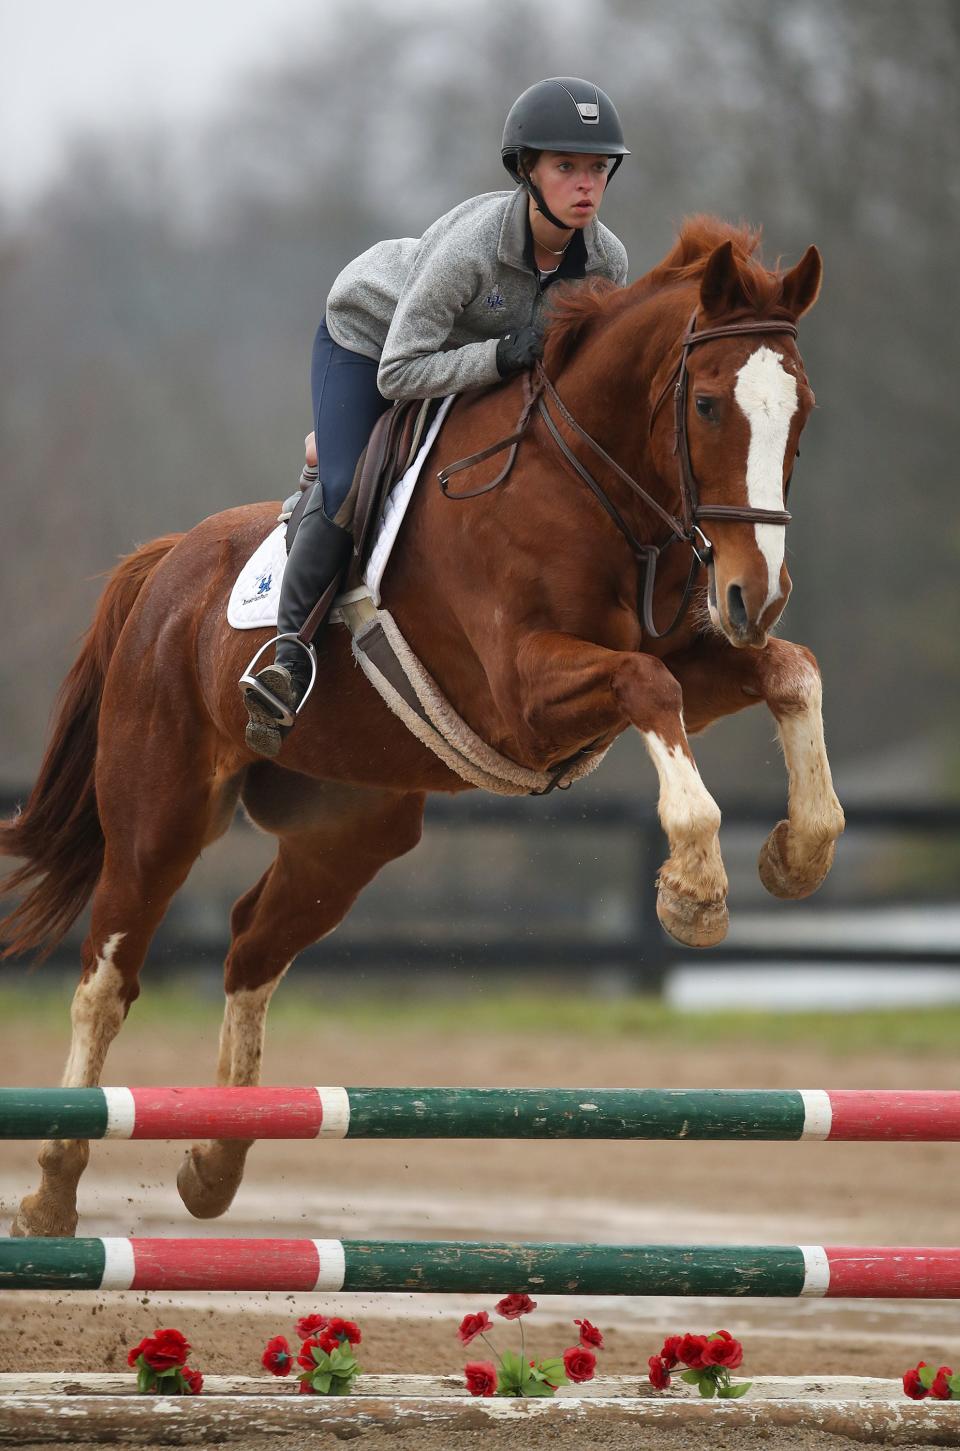 Grace Bieghler, aboard Buddy, clears a jump during Equitation practice for the University of Kentucky Equestrian Team on Monday, November 8, 2022 [Via MerlinFTP Drop]